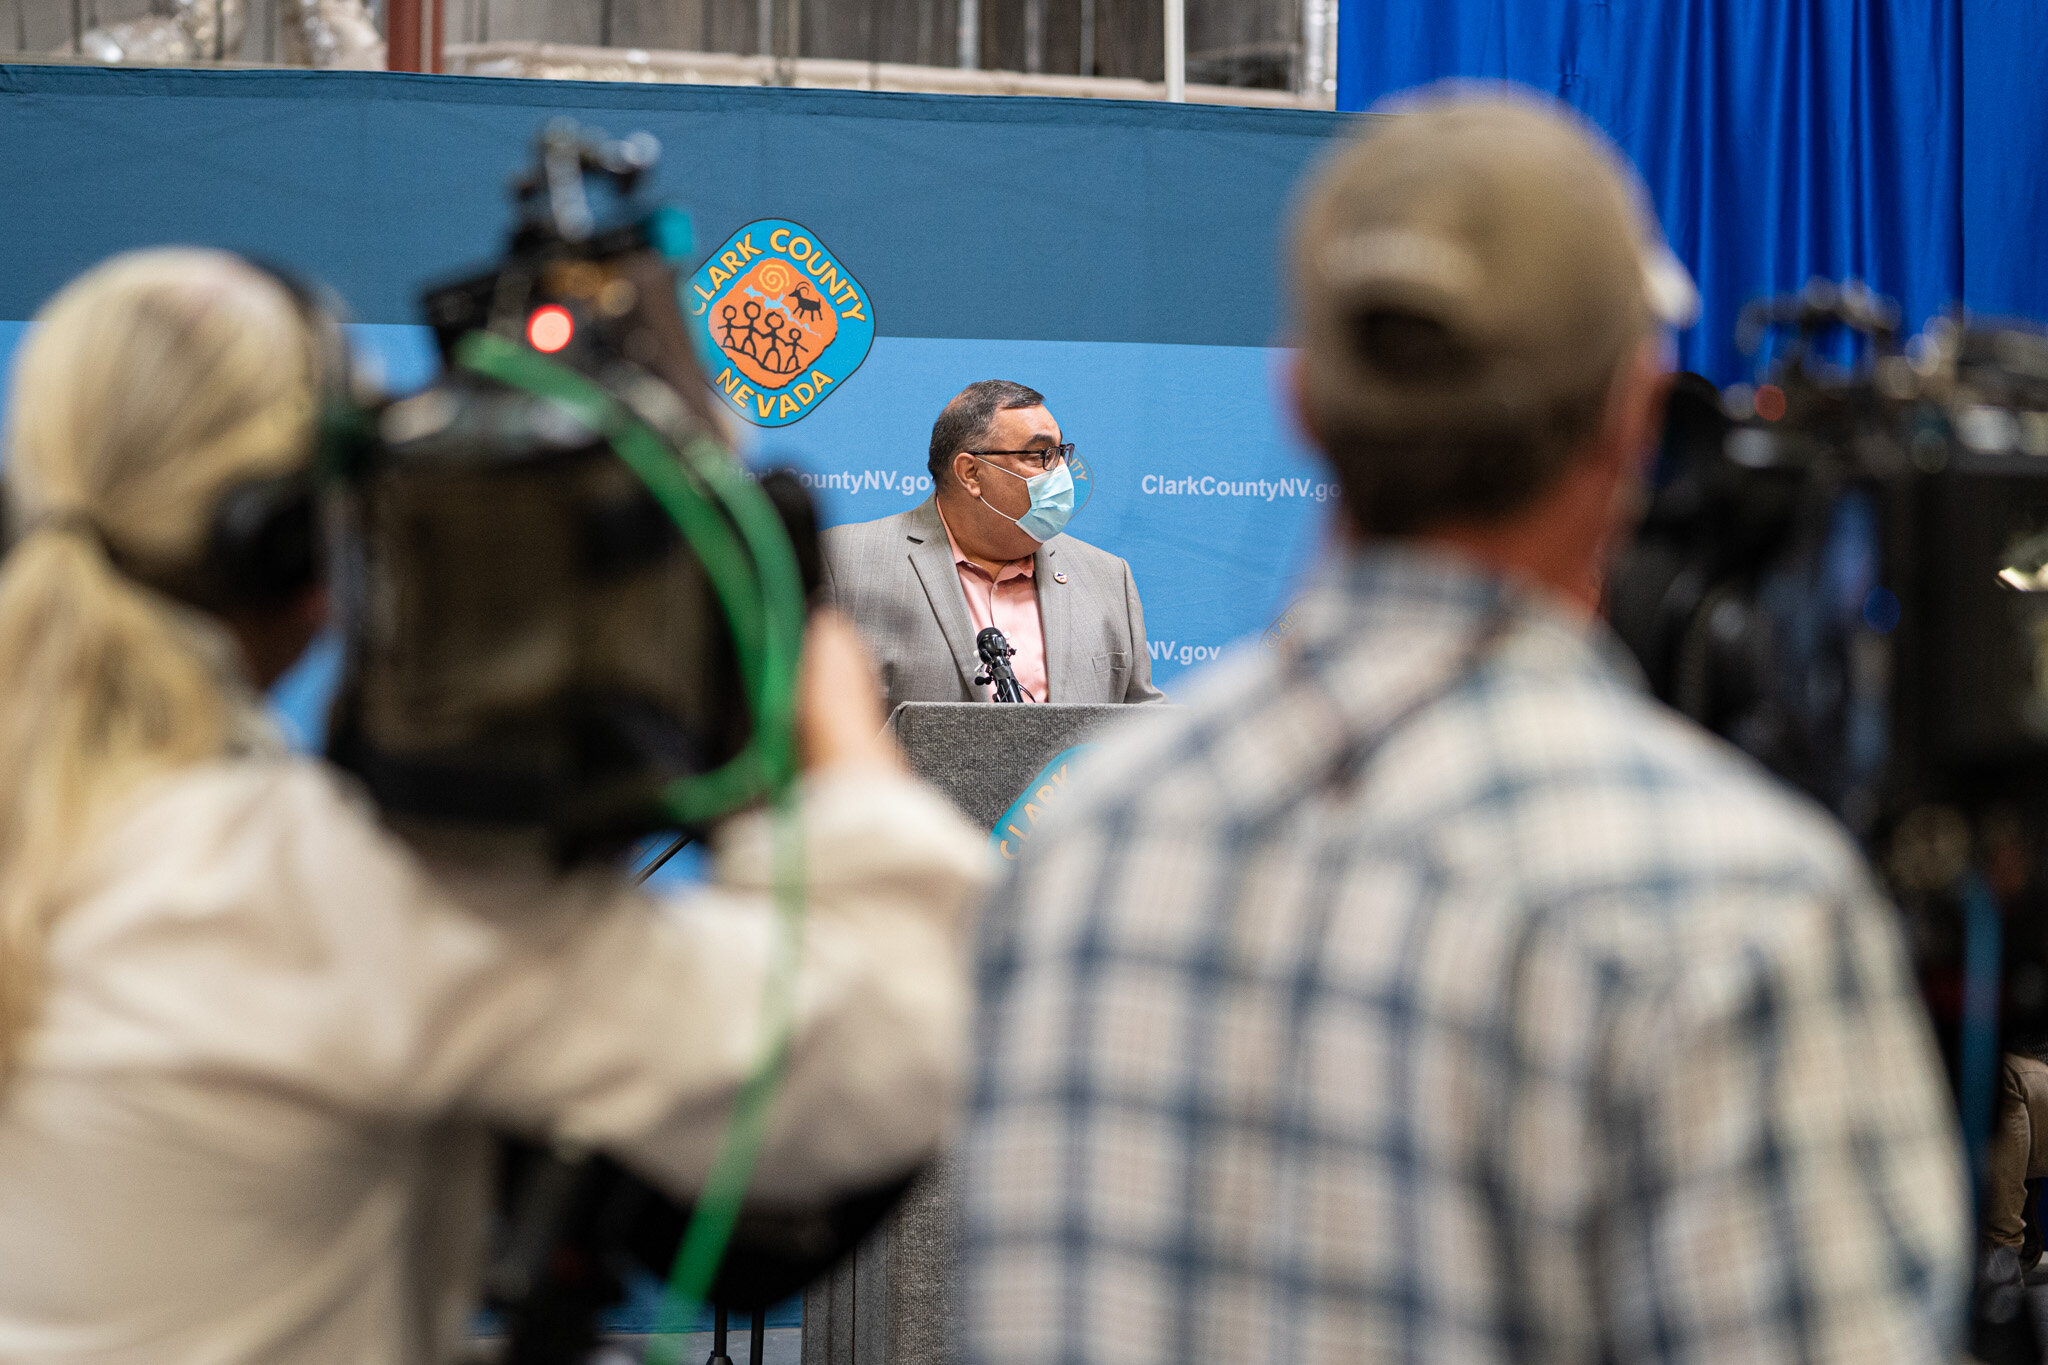  Joe Gloria, Registrar of Voters for Clark County, hosts a press conference to provide an update on the ballot counts being processed in the facility. November 5, 2020 